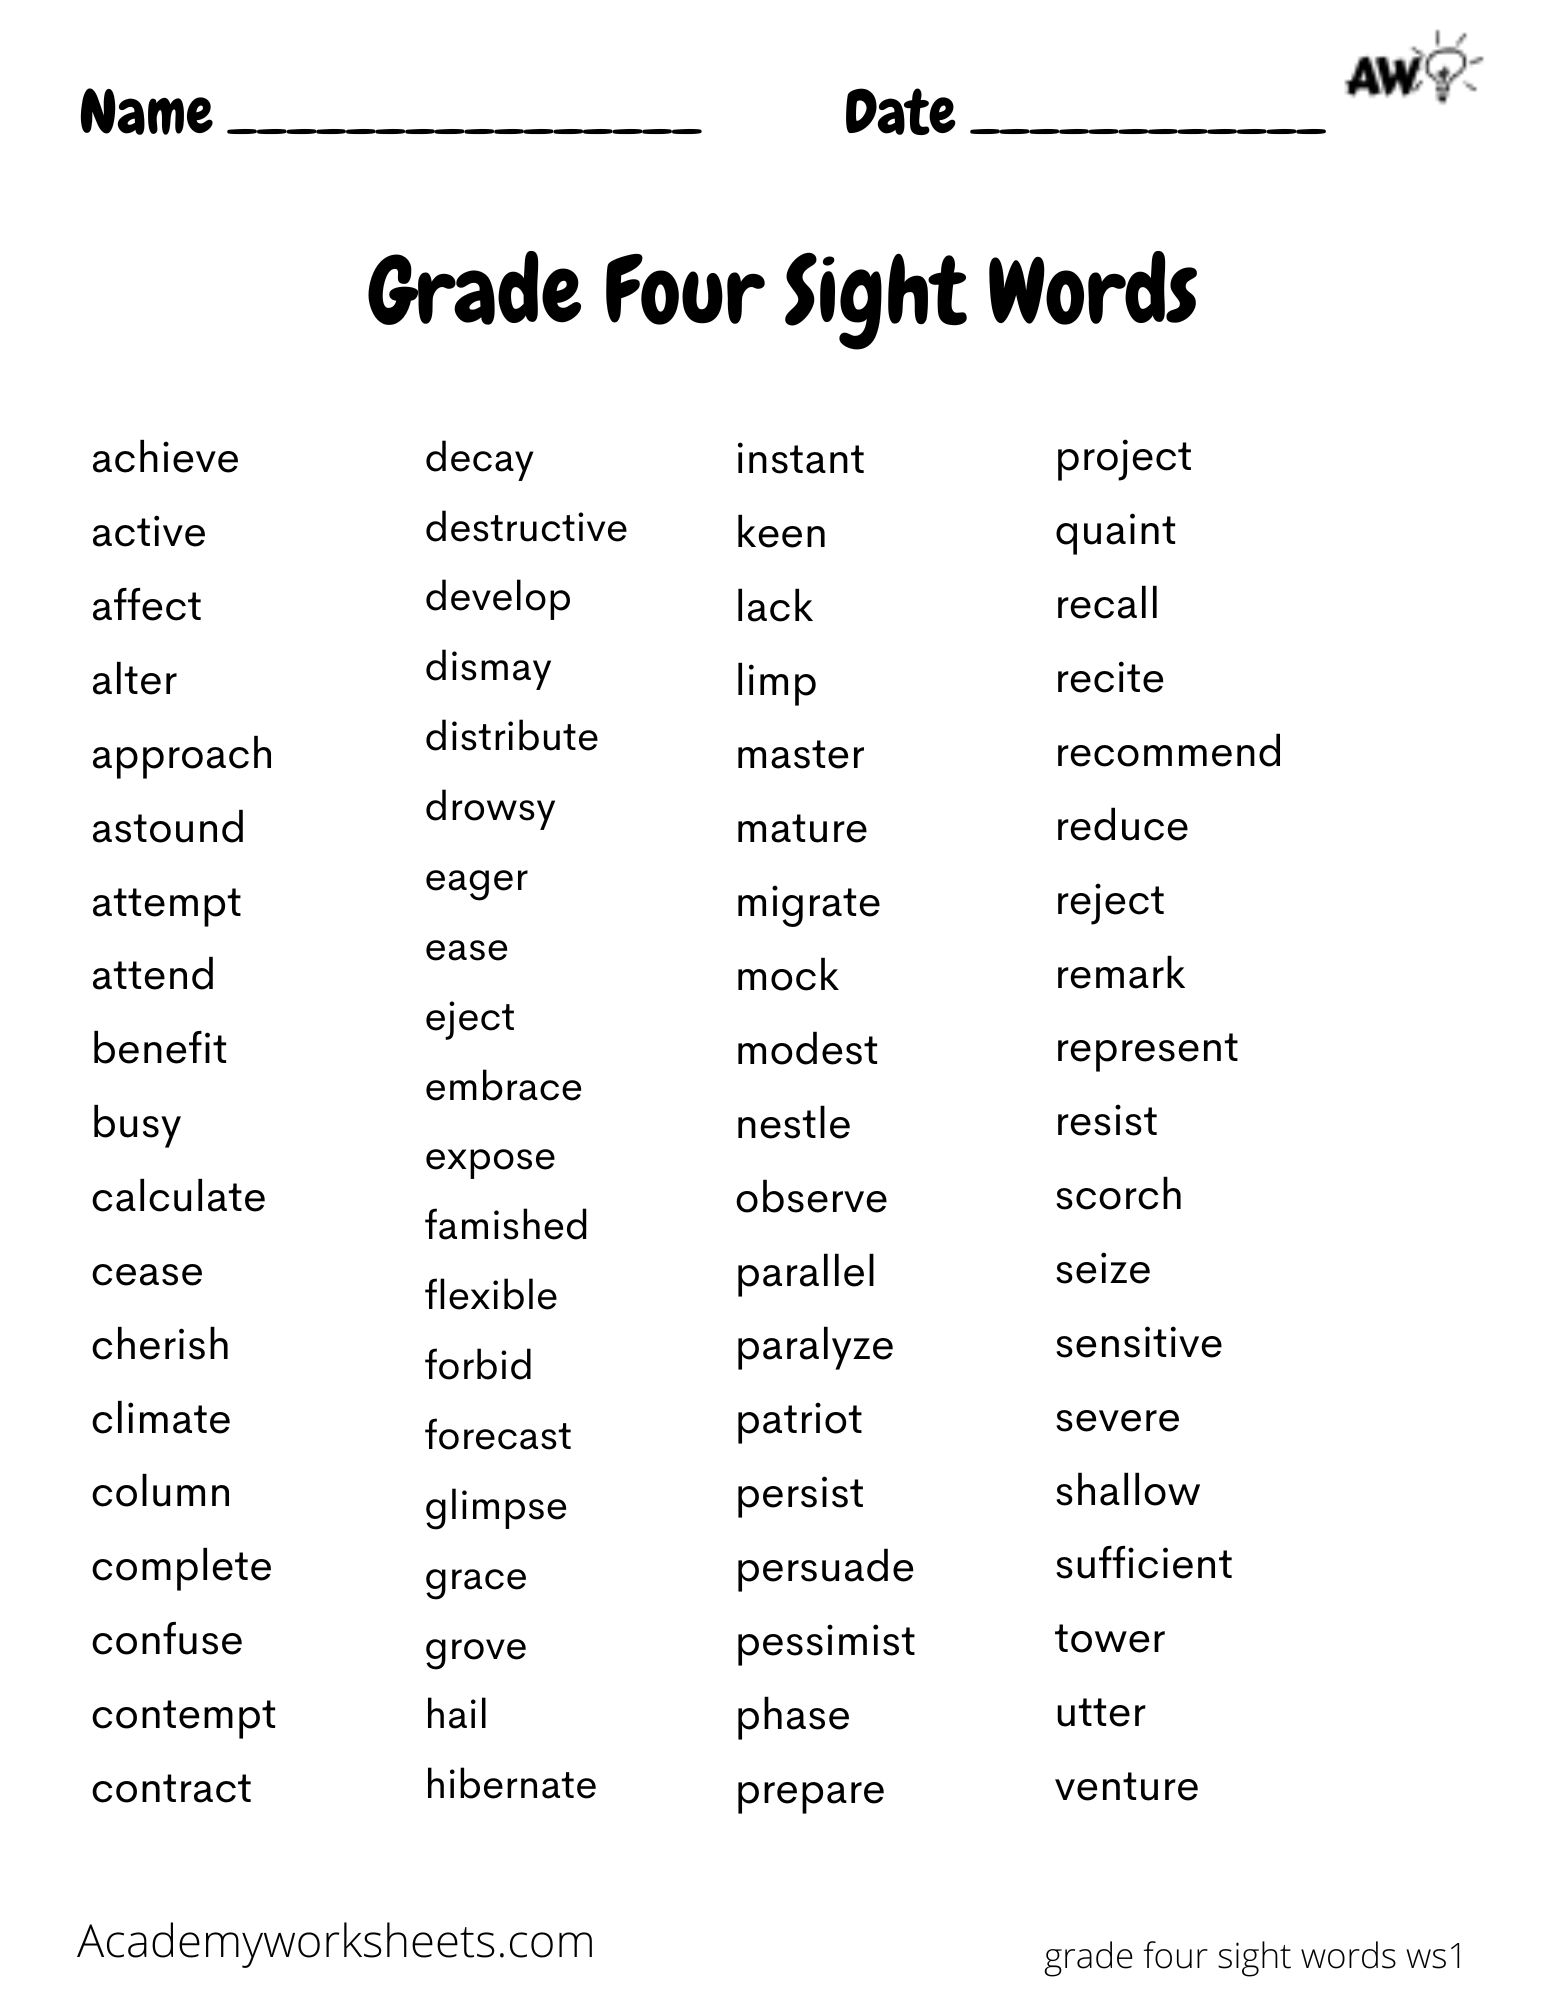 sight-words-archives-academy-worksheets